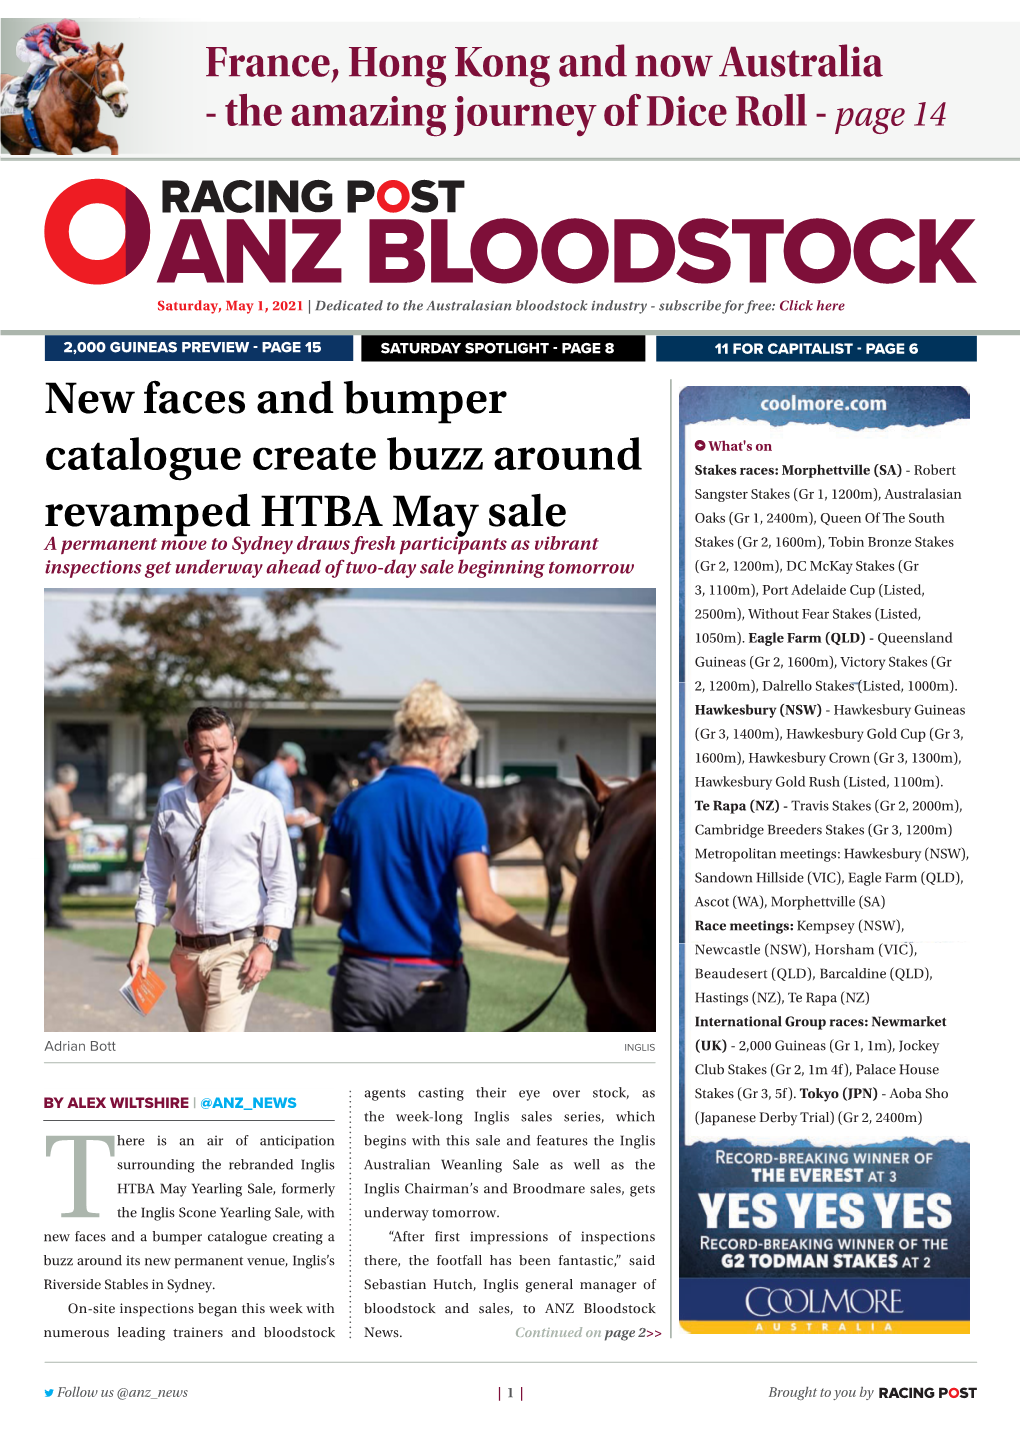 New Faces and Bumper Catalogue Create Buzz Around Revamped HTBA May Sale | 2 | Saturday, May 1, 2021